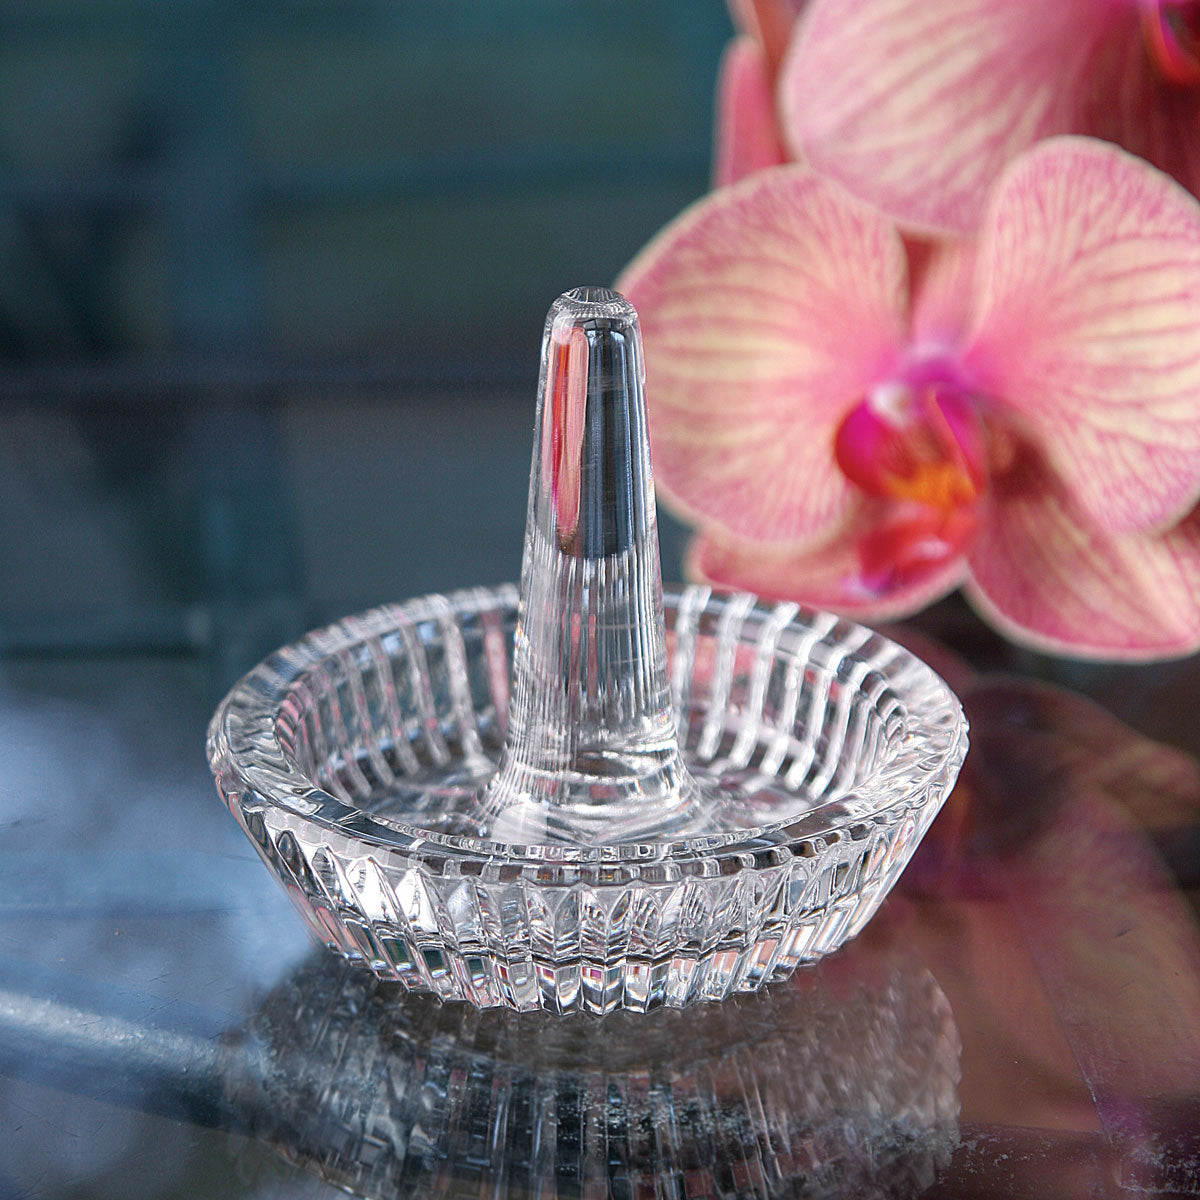 Waterford Crystal Heritage Round Ring Holder   Keep your engagement, wedding and decorative rings safe on this stunning crystal Ring Holder, which features a central spike for holding rings, and a round, ridged tray for storing necklaces or earrings. An elegant addition to any desk or vanity.